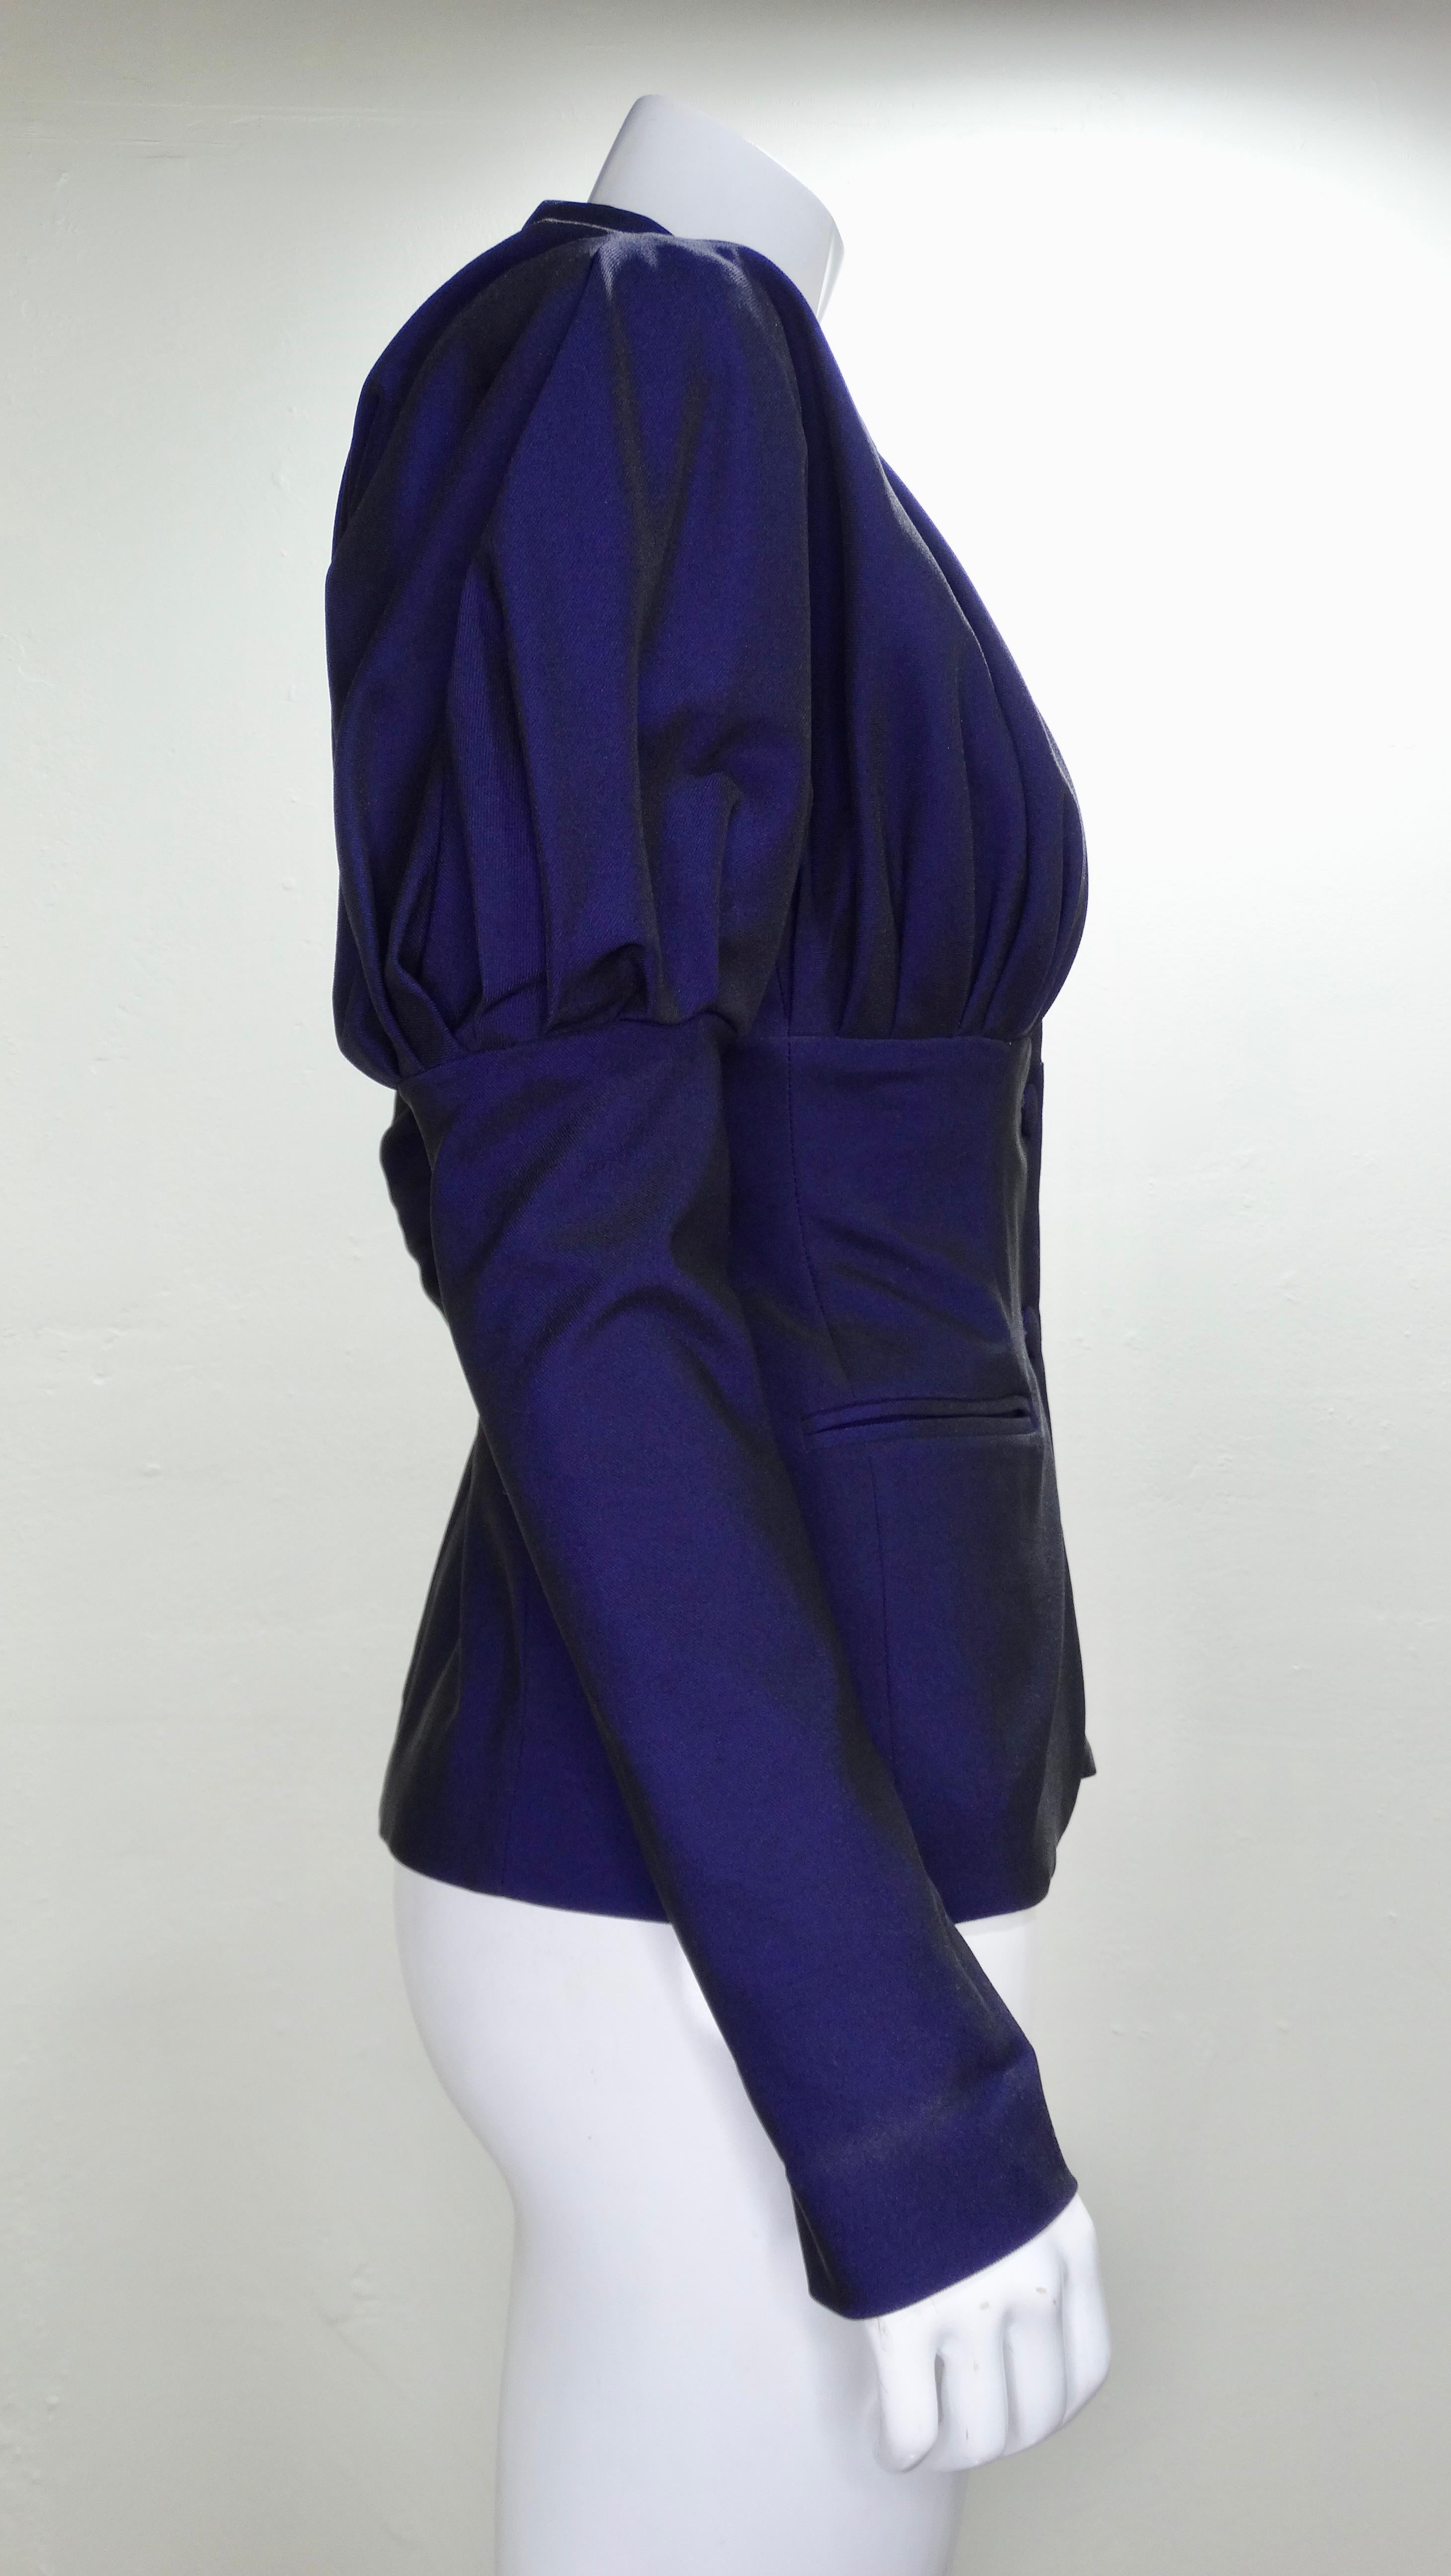 Circa late 1980s, this stunning Romeo Gigli Victorian style blazer features a beautiful deep iridescent purple color and large leg-o-mutton sleeves. Pleating on the Yoke back and the bust create a gorgeous structured silhouette. Matching coated